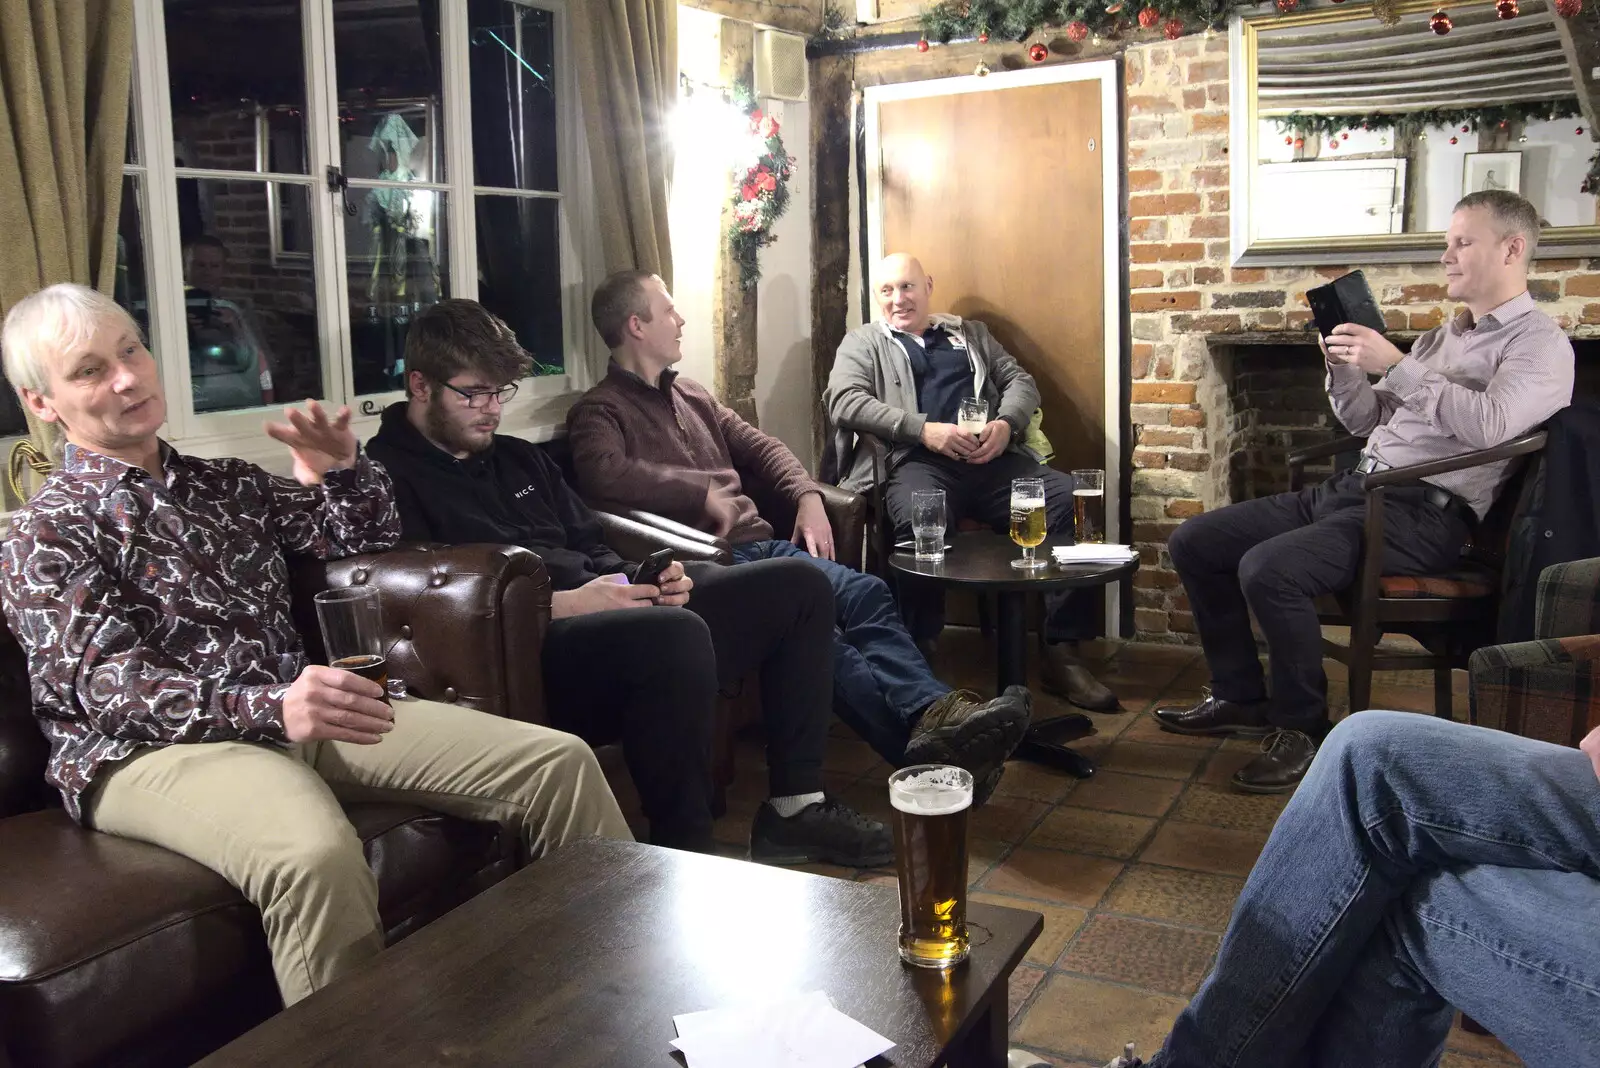 The lads meet up at the Thorndon Black Horse, from GSB Carols and Beer With the Lads, Thornham and Thorndon, Suffolk  - 18th December 2021